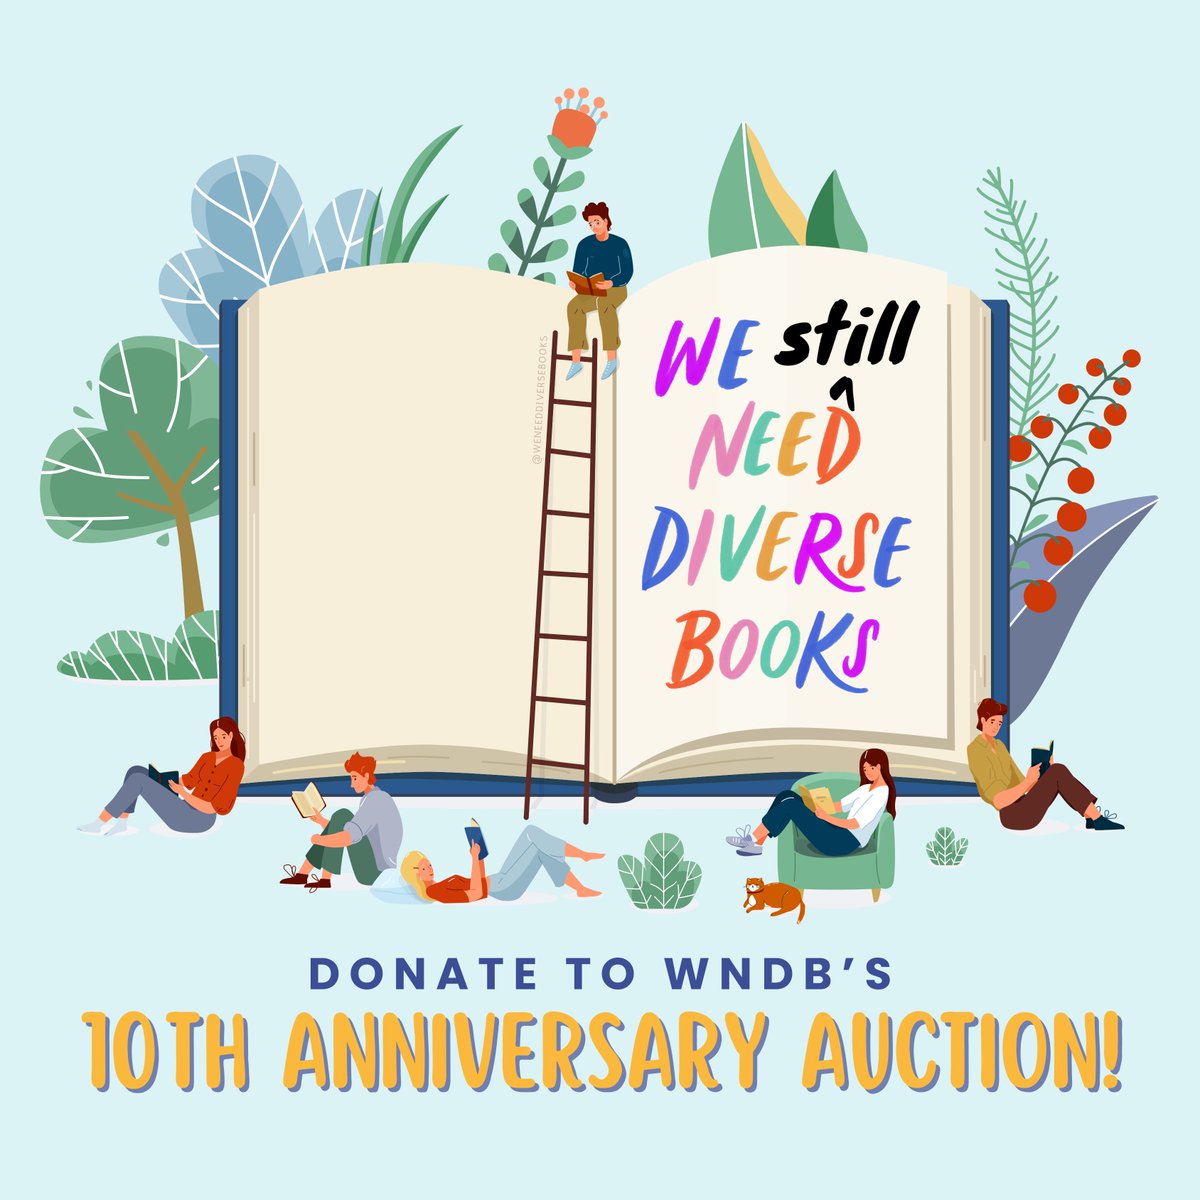 🔔 Now accepting donations for our big 10th Anniversary Auction! 📚 After starting as a hashtag a decade ago, WNDB will soon celebrate with a special anniversary auction so that we can continue showing the world that #WeStillNeedDiverseBooks 📚✊ 📖 bit.ly/WNDBAuction10